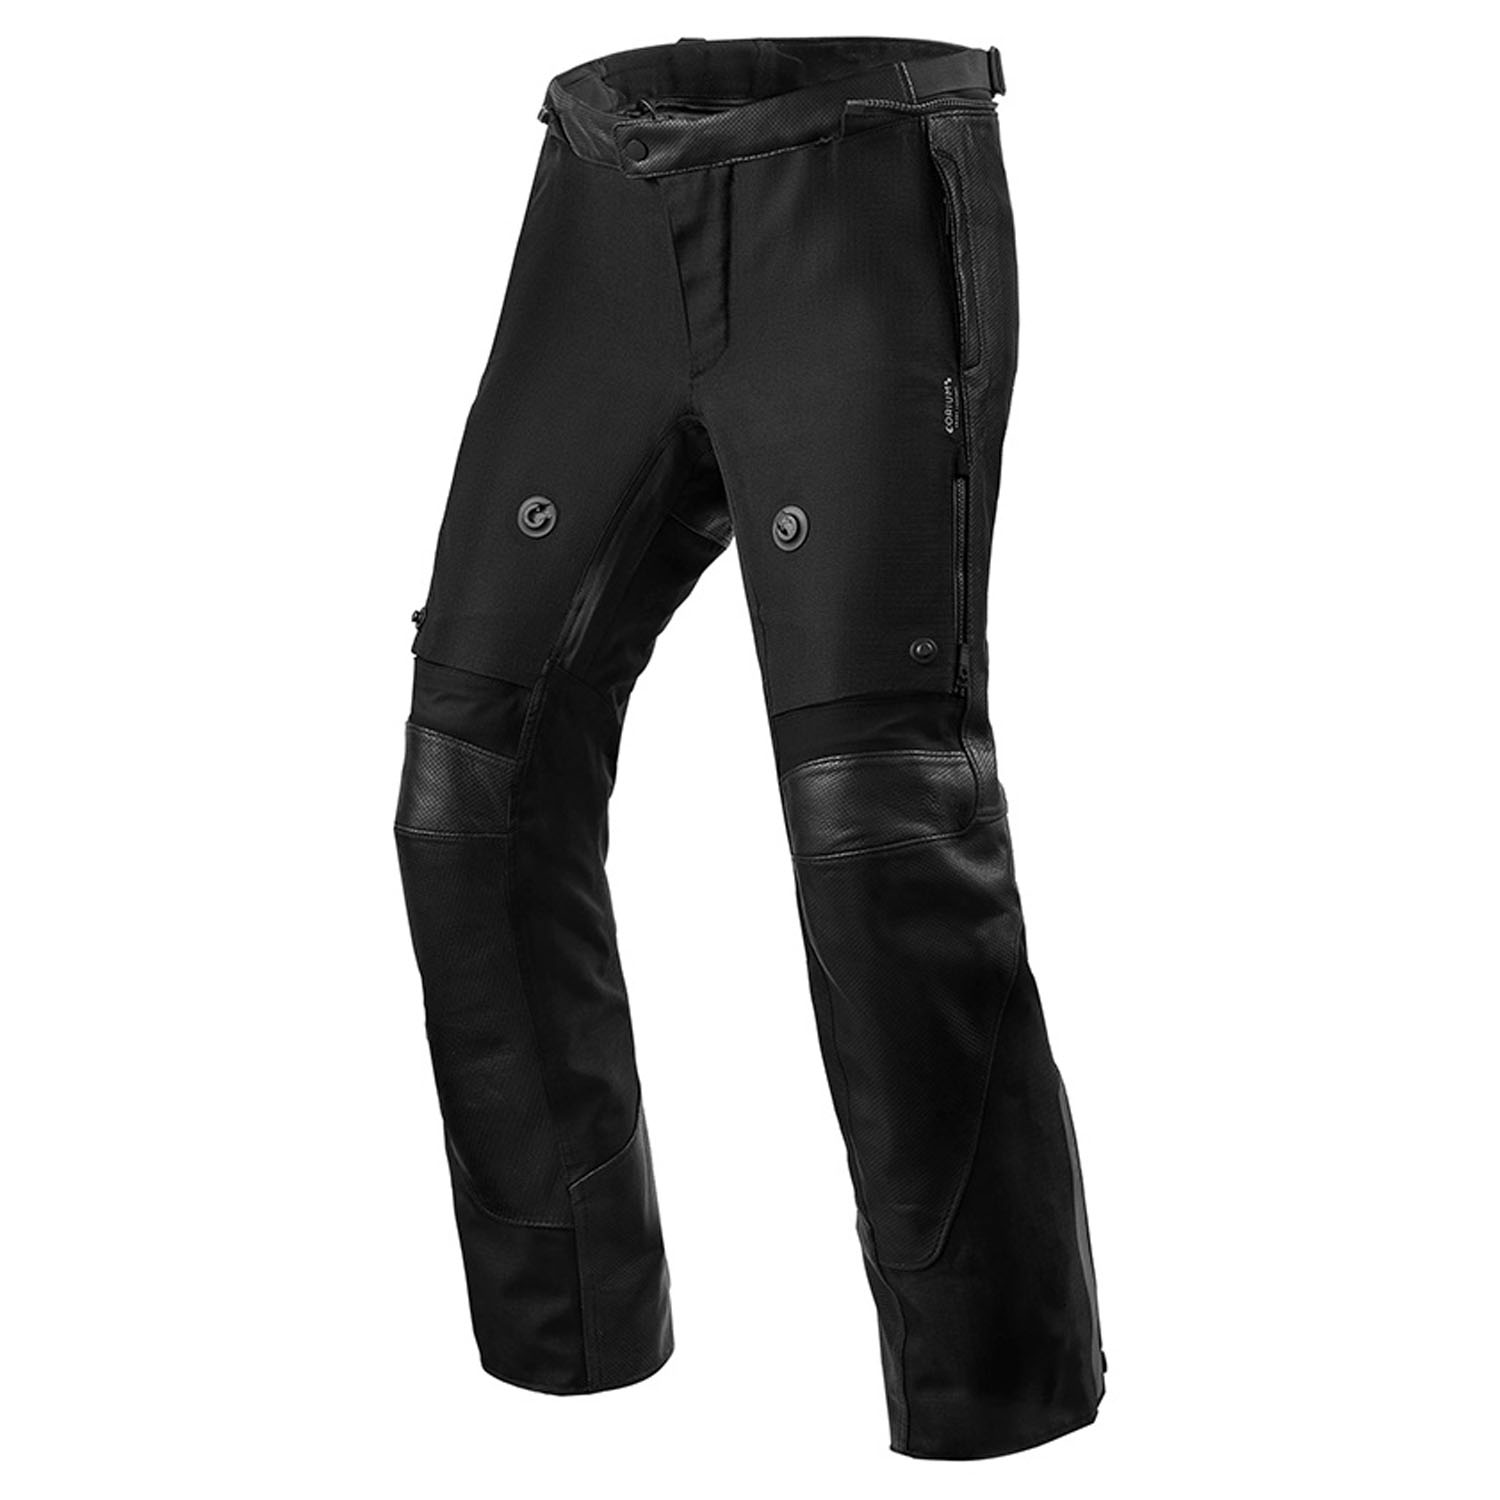 Image of EU REV'IT! Trousers Valve H2O Black Short Motorcycle Pants Taille 52